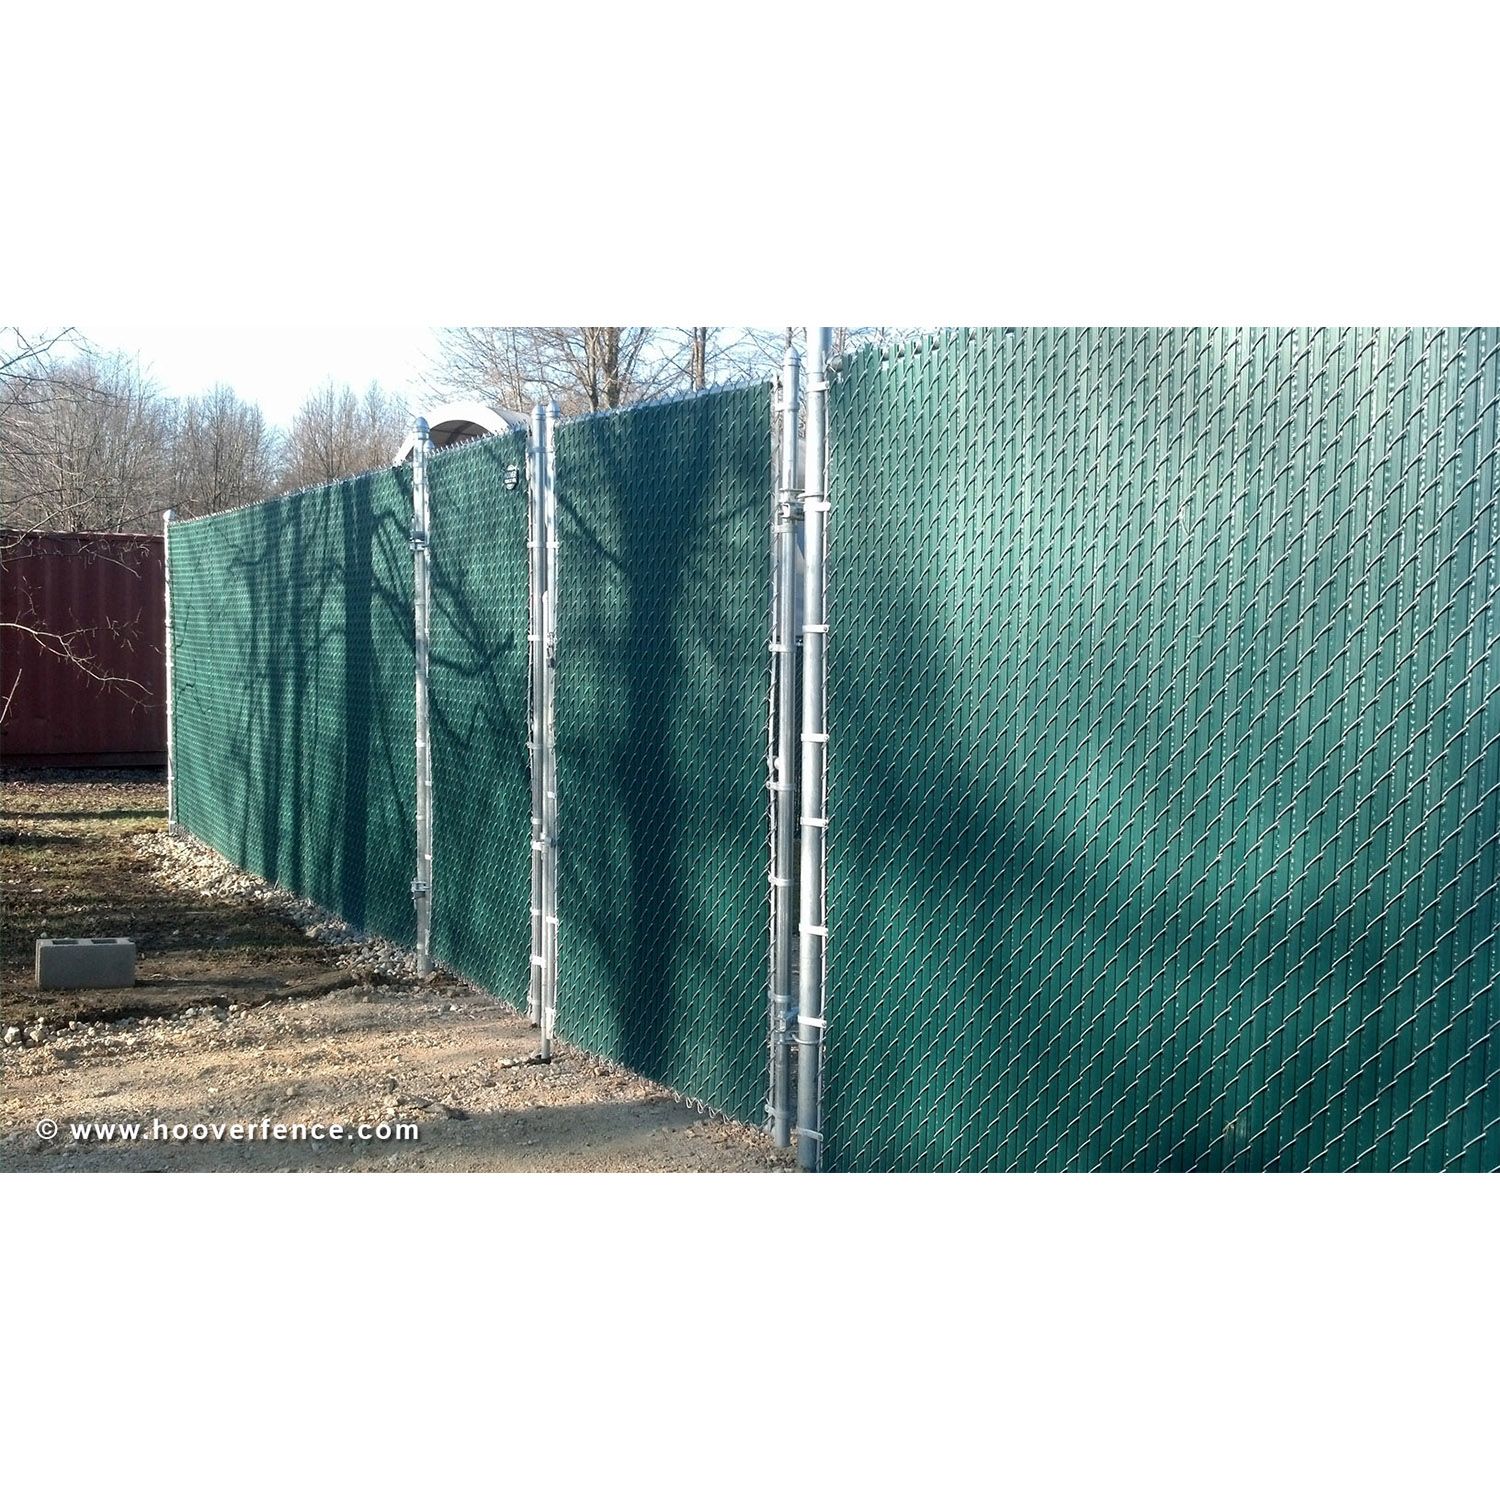 Pexco Pds Winged Privacy Slats For Chain Link Fence Hoover Fence Co ...